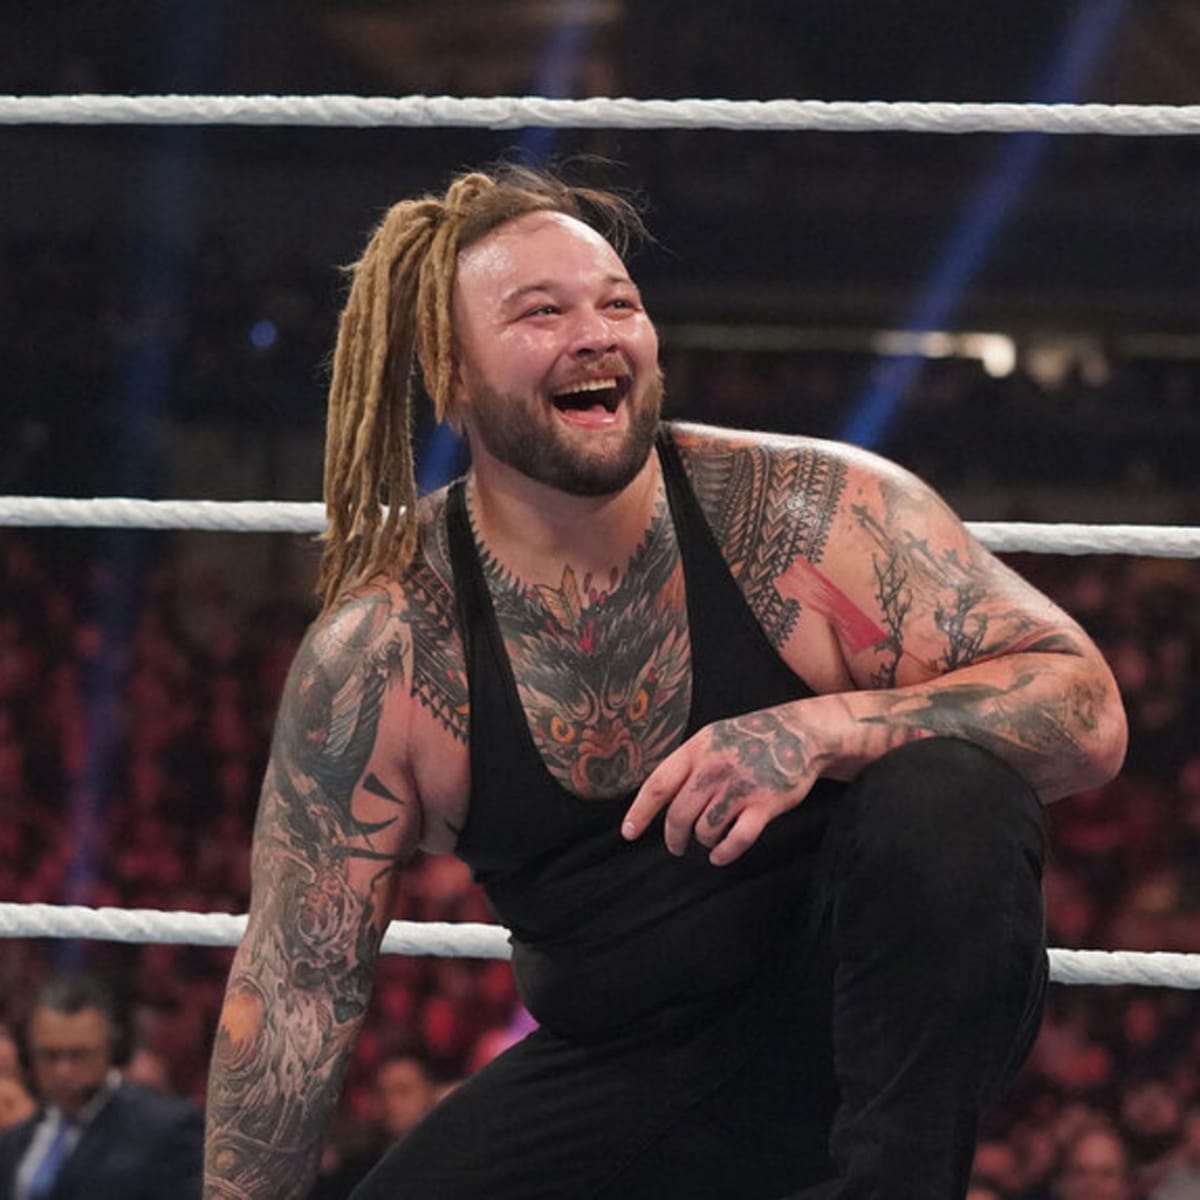 WWE announces Bray Wyatt documentary narrated by The Undertaker